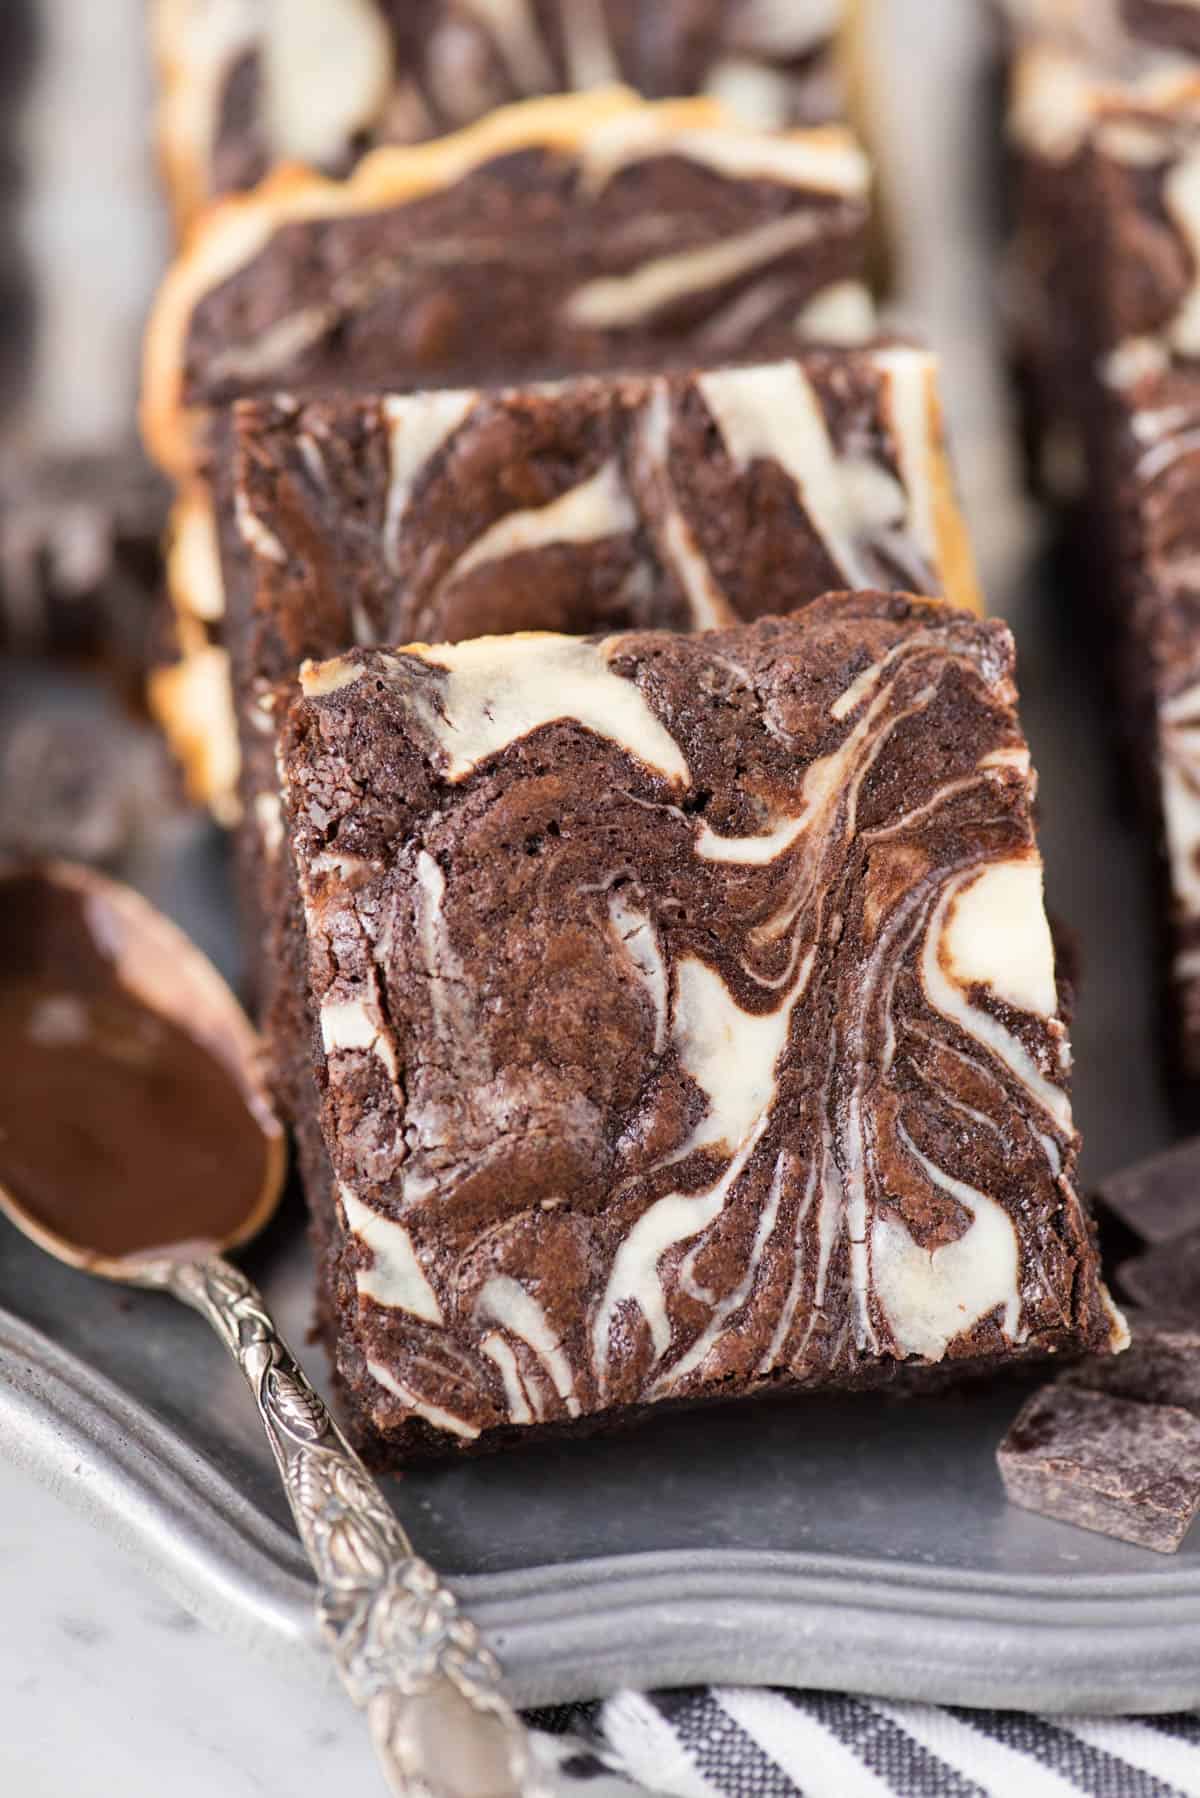 cream cheese swirl brownie on metal serving tray with spoon dipped in chocolate